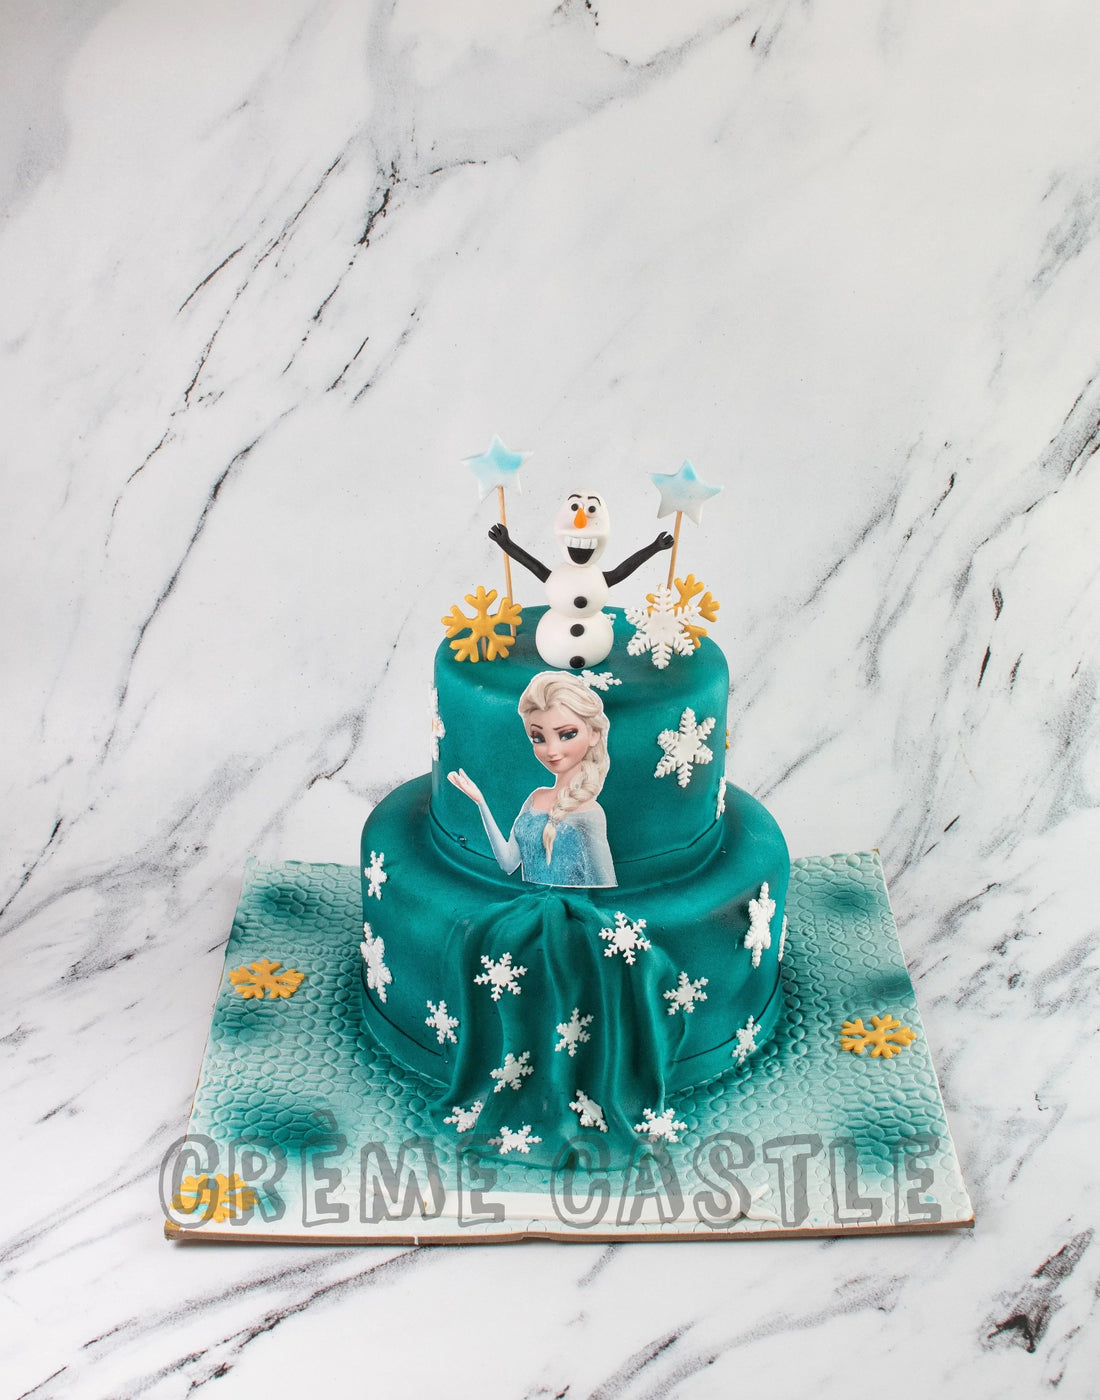 Frozen theme Cake with Hand Painting by Creme Castle